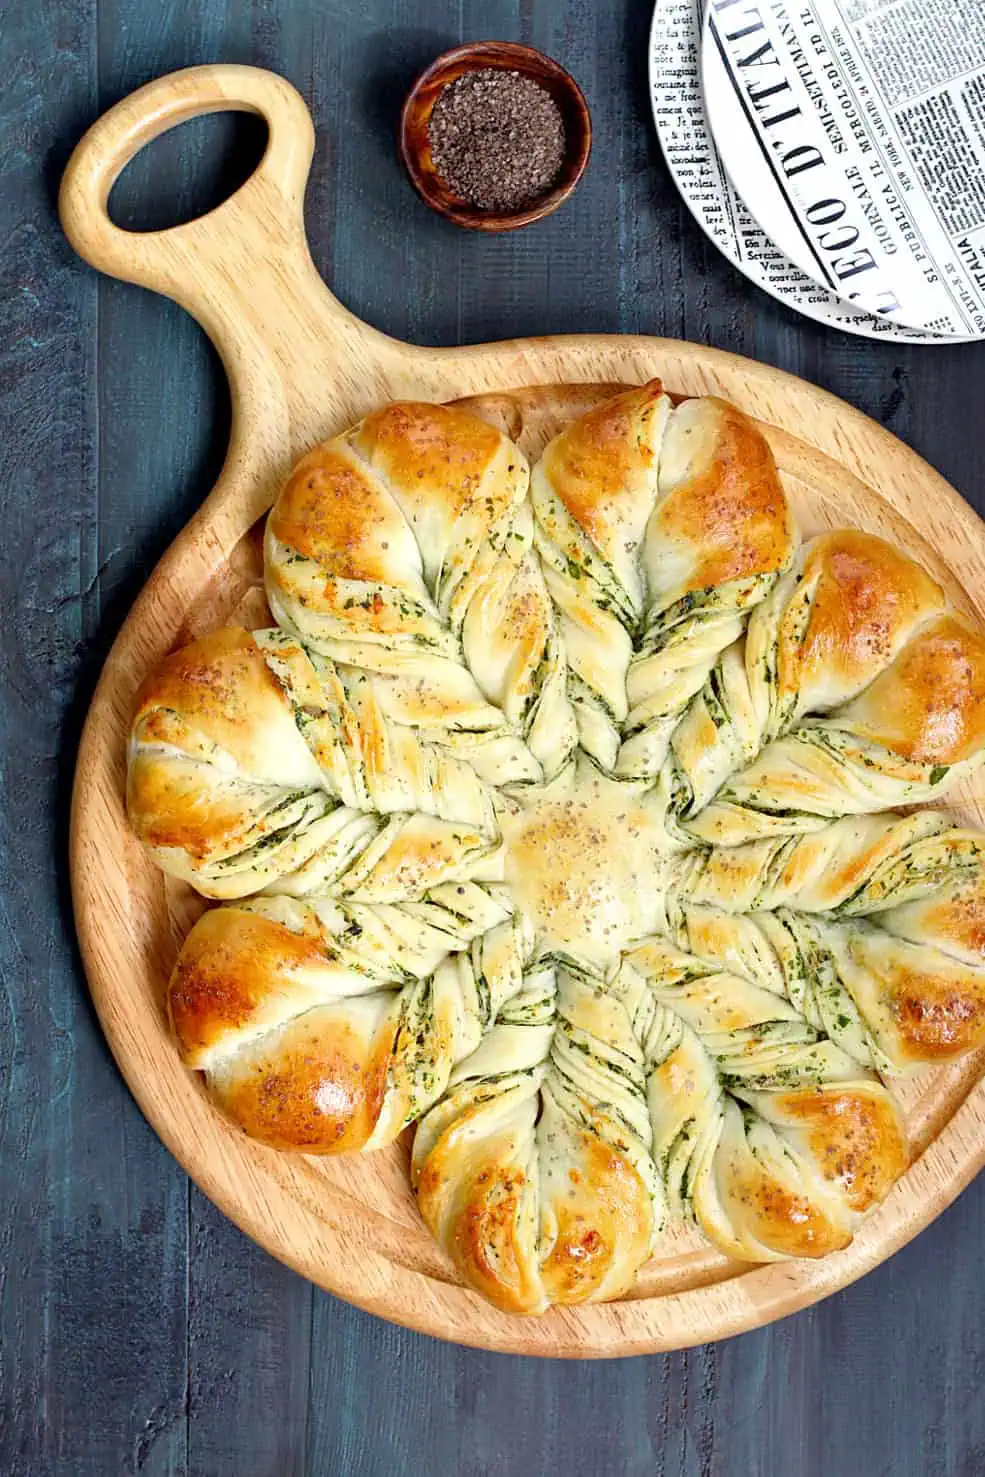 Star Bread with Cheese and Herbs